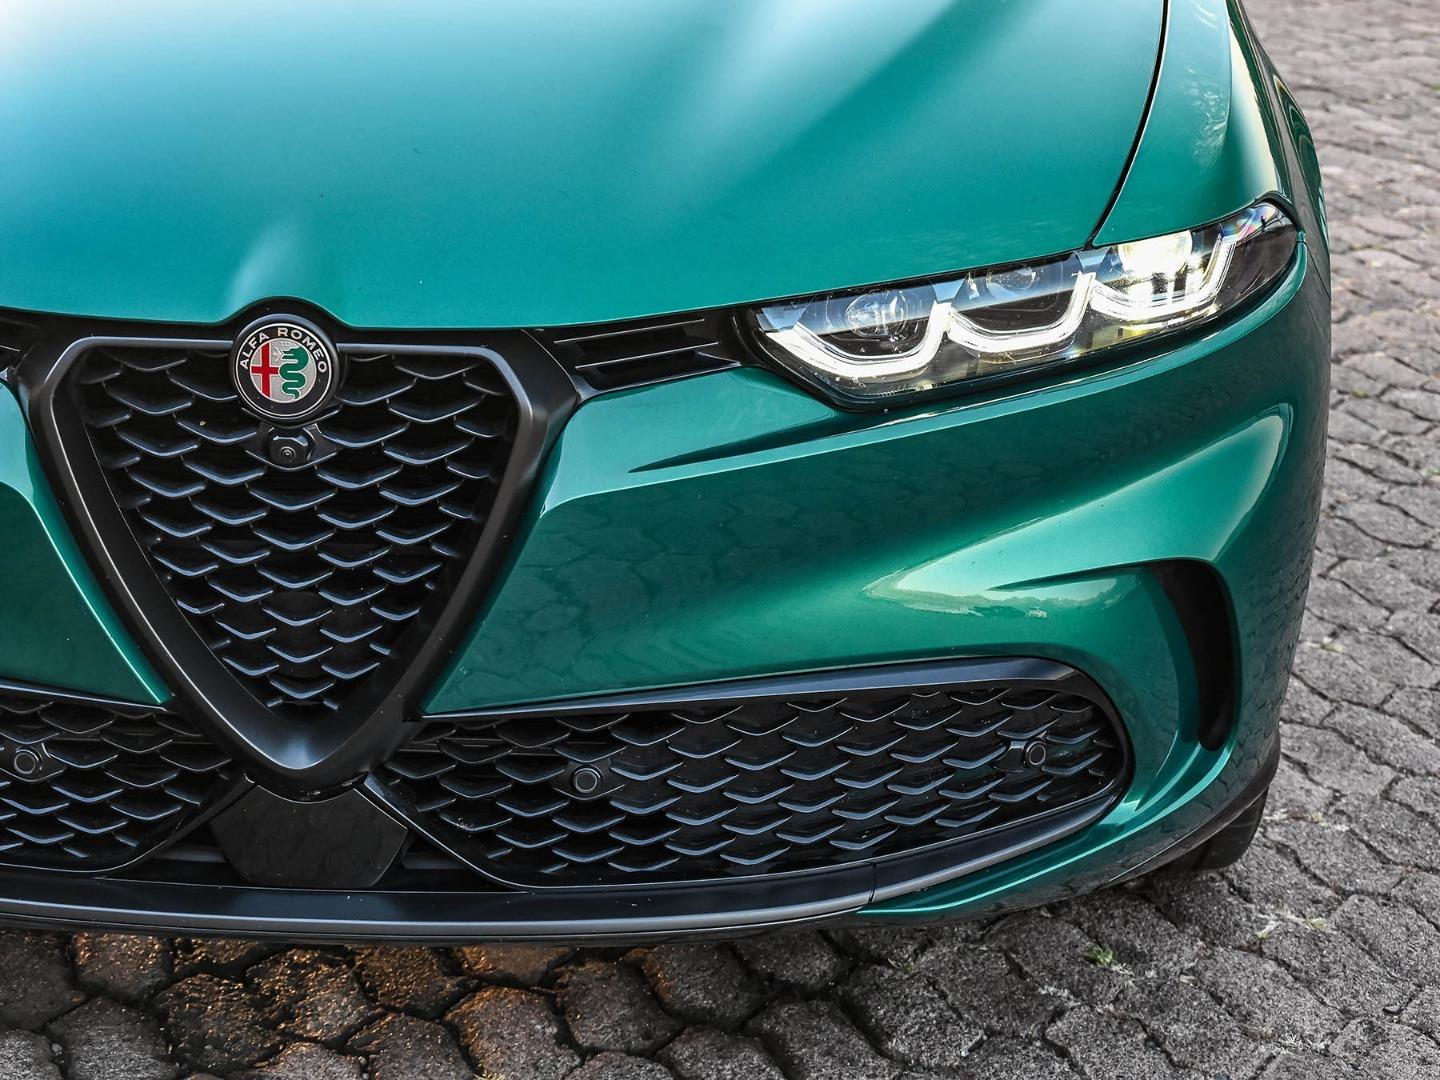 how much are car repayments on a new alfa romeo tonale?